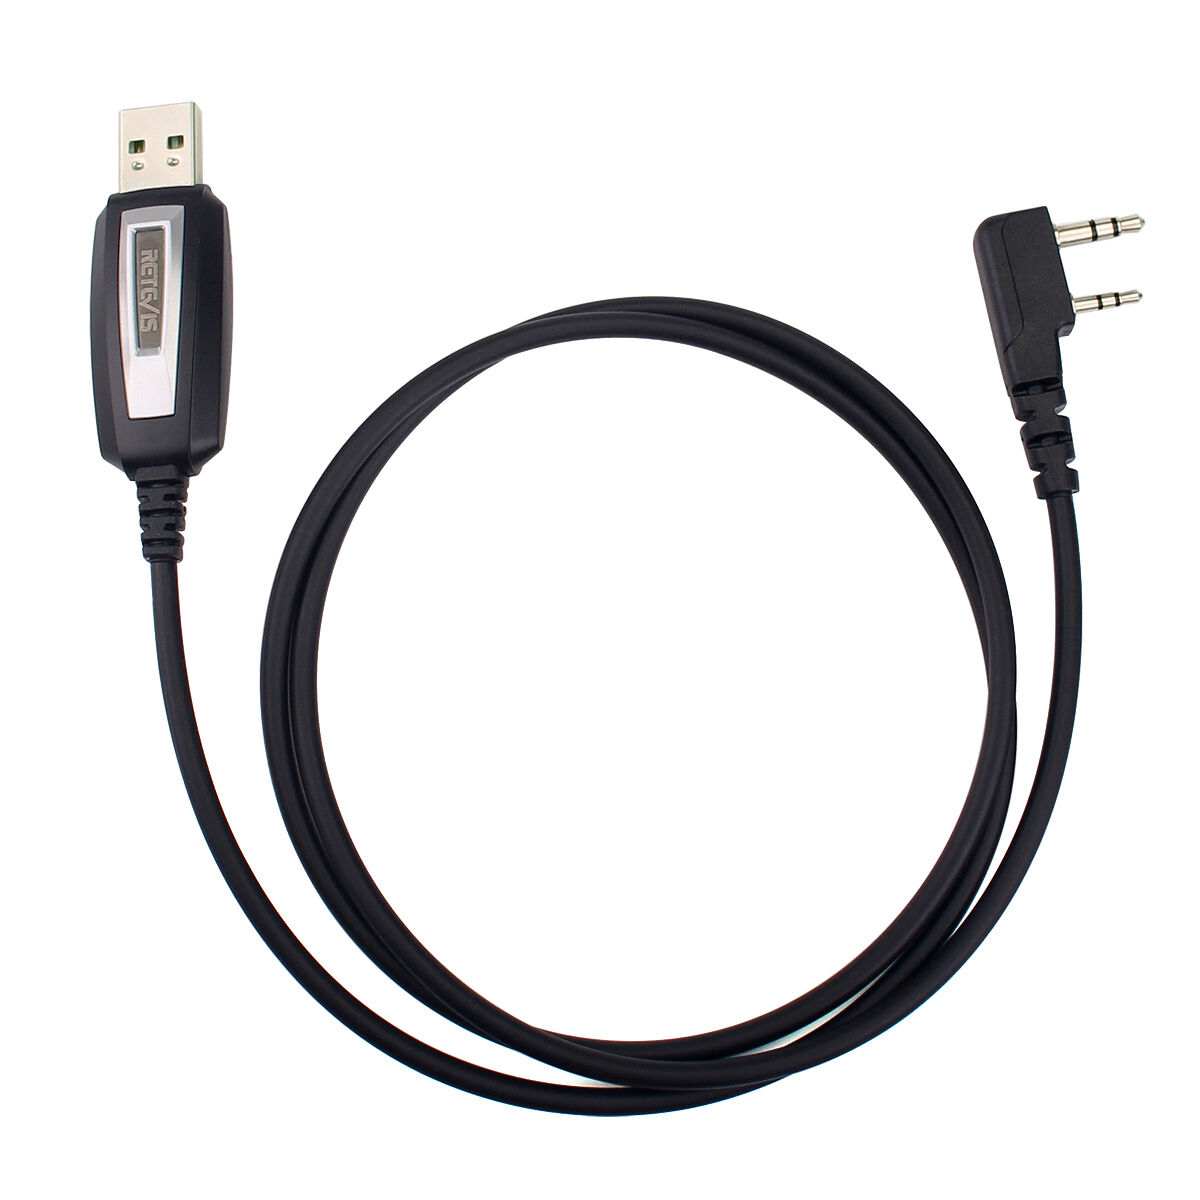 Programming Cable for RT-5R /H777 UV5R/888s